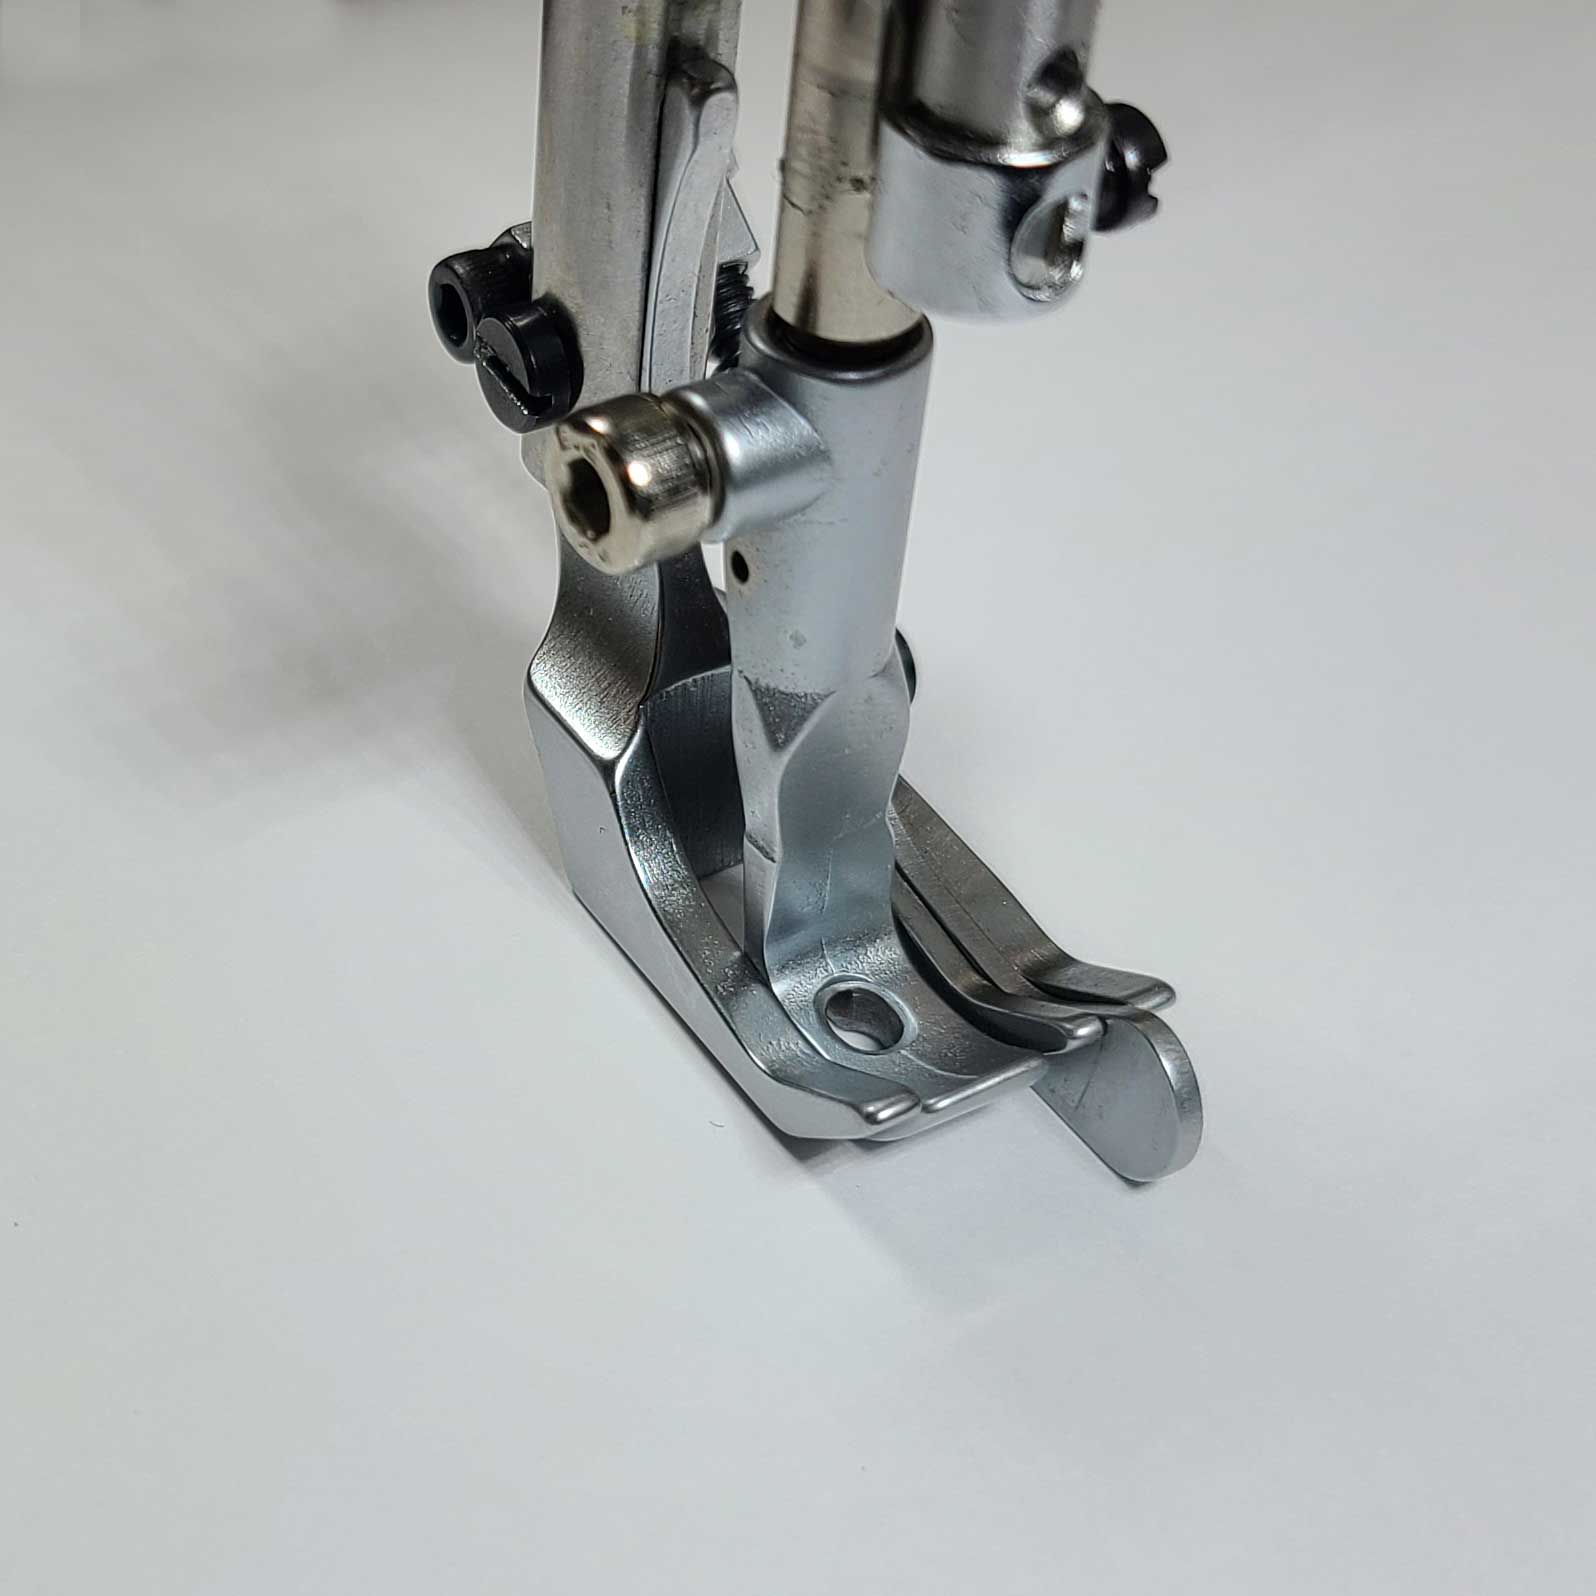 Deluxe right side guide foot for a compound feed - 6mm